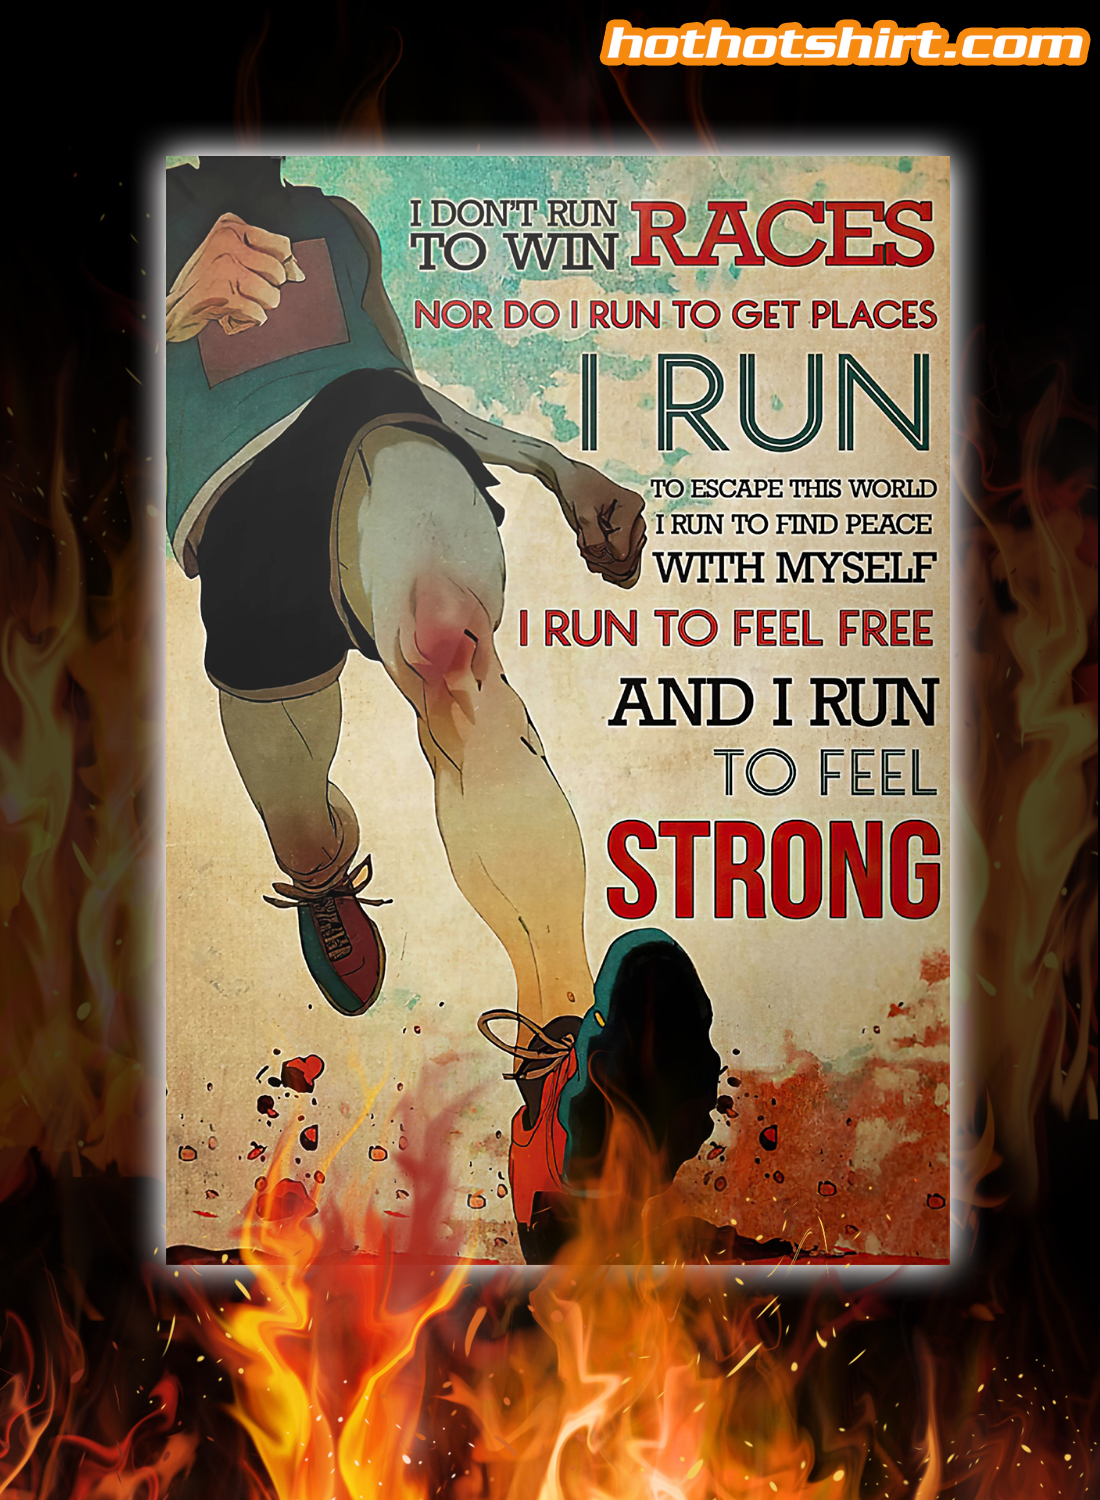 Running I don’t run races to win nor do i run to get places poster